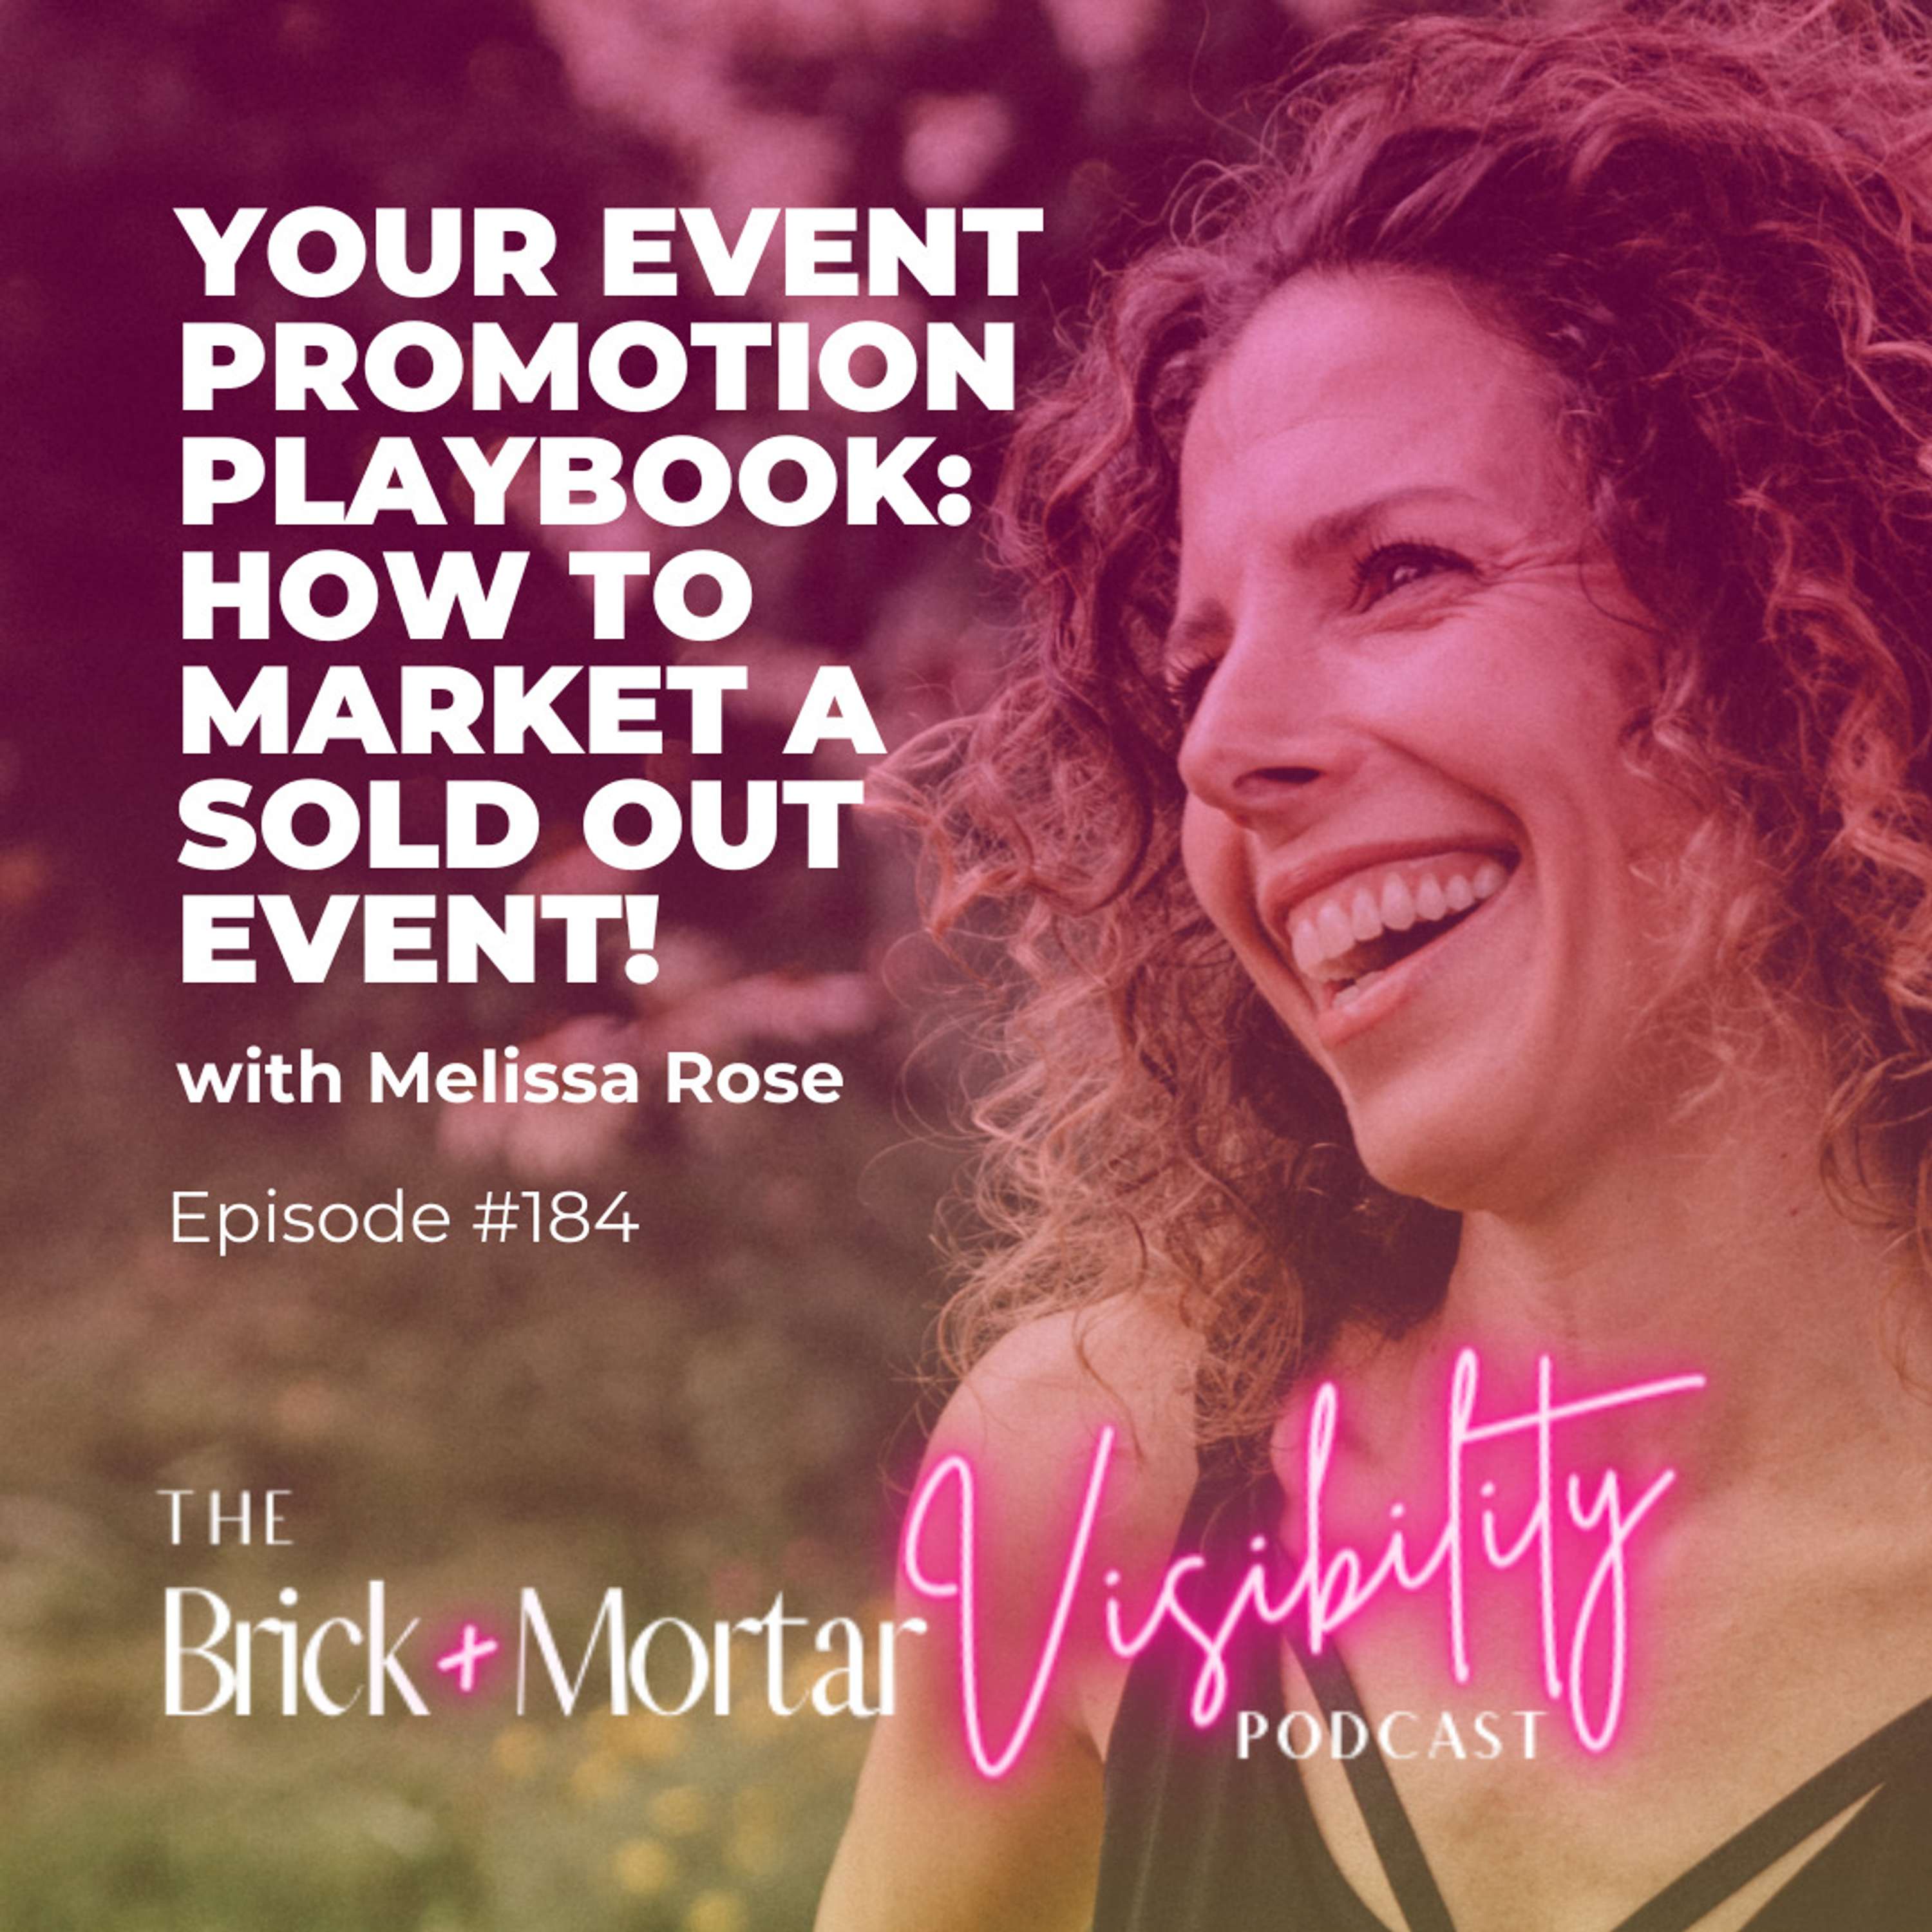 Your Event Promotion Playbook: How to Market a SOLD OUT event!